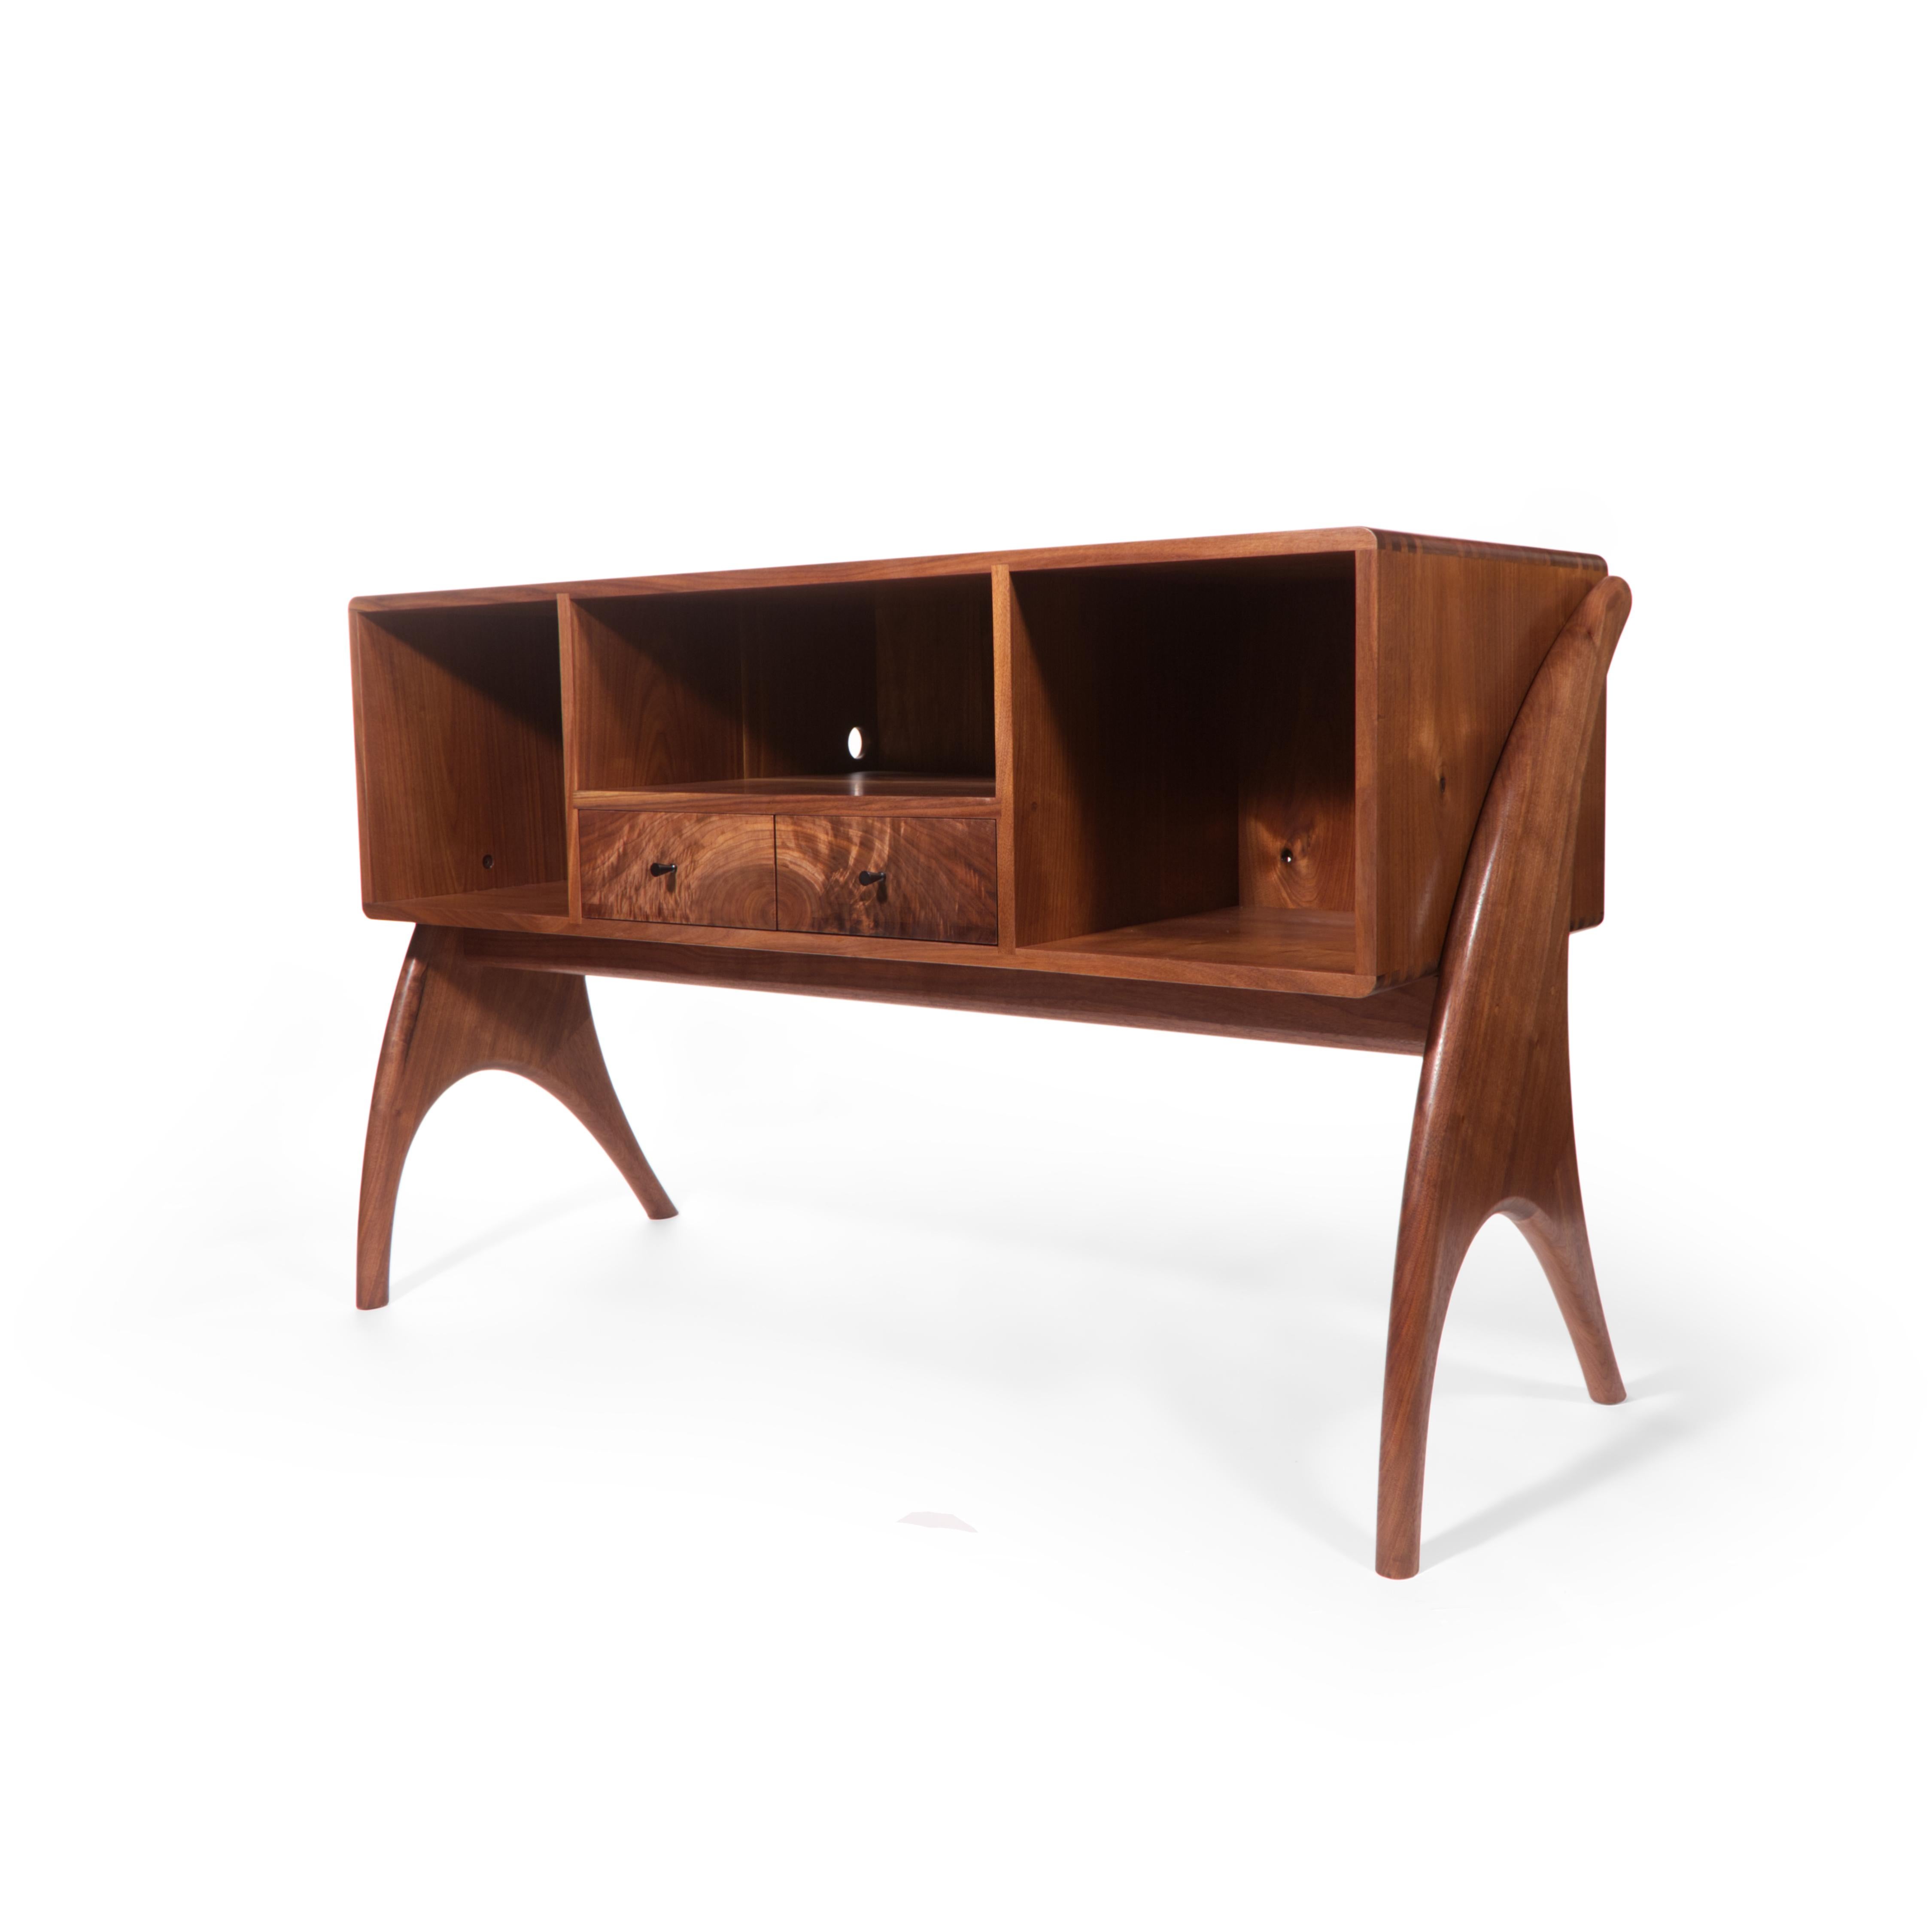 Designed and crafted at our Chicago studio, the HiFi Record Cabinet is a must-have home for your prized audio equipment. Crafted from solid Walnut wood and featuring hand-cut dovetail construction with hand-turned Ebony wood pulls, this case piece